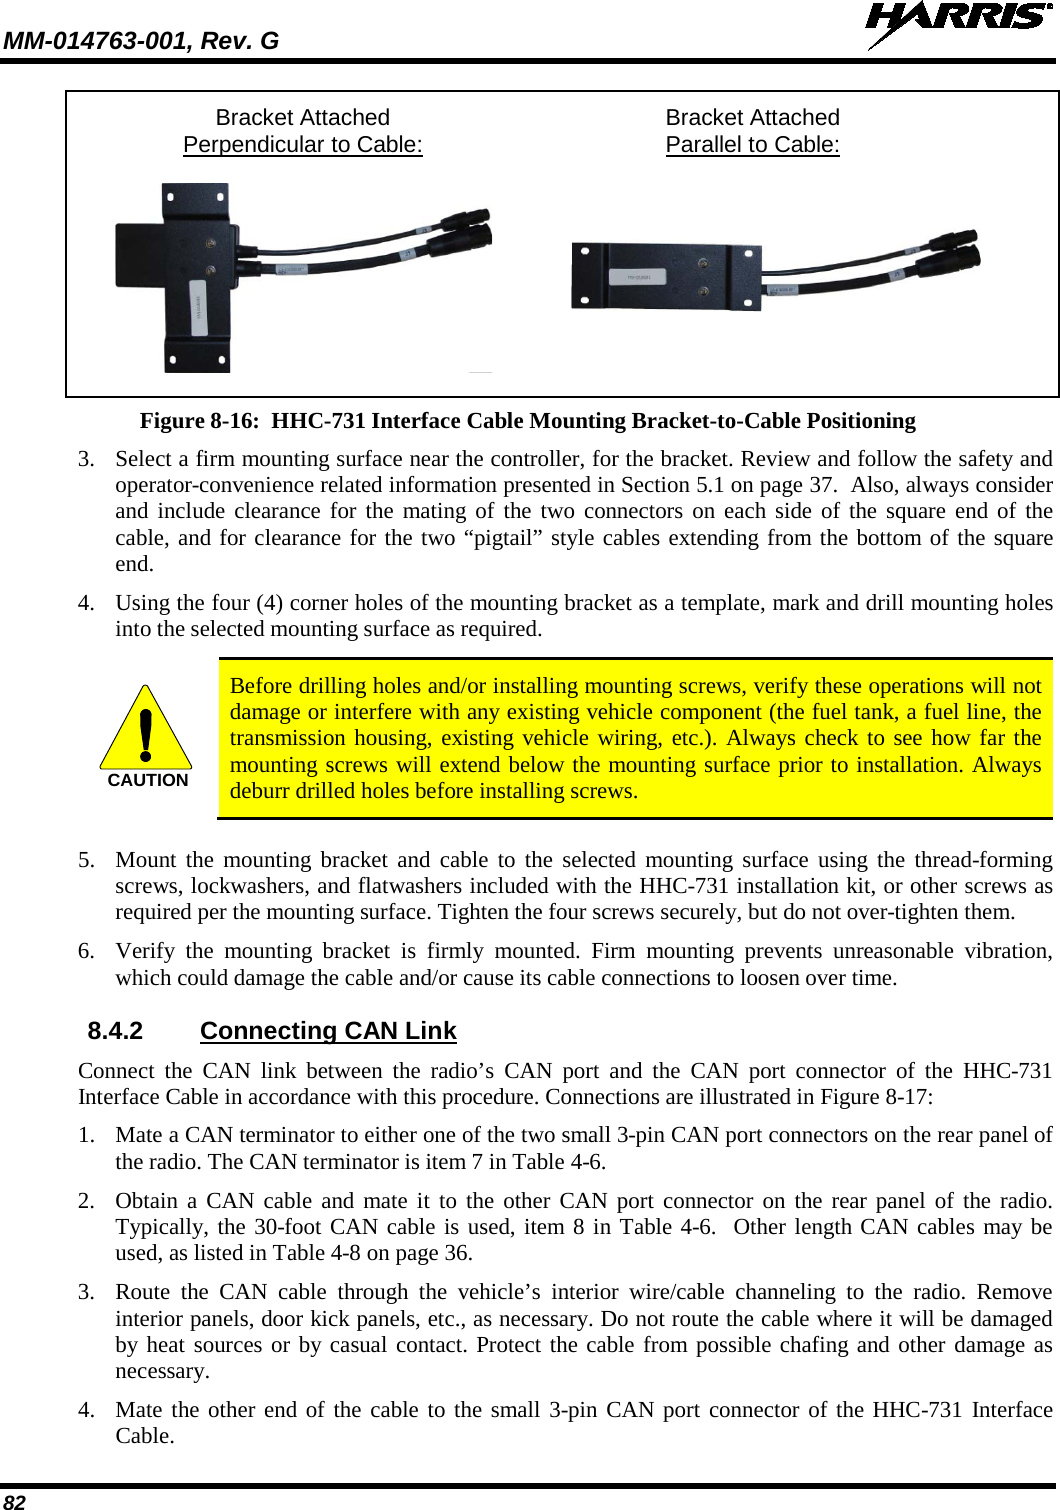 MM-014763-001, Rev. G   82  Bracket Attached Bracket Attached   Perpendicular to Cable:  Parallel to Cable:     Figure 8-16:  HHC-731 Interface Cable Mounting Bracket-to-Cable Positioning 3. Select a firm mounting surface near the controller, for the bracket. Review and follow the safety and operator-convenience related information presented in Section 5.1 on page 37.  Also, always consider and include clearance for the mating of the two connectors on each side of the square end of the cable, and for clearance for the two “pigtail” style cables extending from the bottom of the square end. 4. Using the four (4) corner holes of the mounting bracket as a template, mark and drill mounting holes into the selected mounting surface as required.   Before drilling holes and/or installing mounting screws, verify these operations will not damage or interfere with any existing vehicle component (the fuel tank, a fuel line, the transmission housing, existing vehicle wiring, etc.). Always check to see how far the mounting screws will extend below the mounting surface prior to installation. Always deburr drilled holes before installing screws.  5. Mount the mounting bracket and cable to the selected mounting surface using the thread-forming screws, lockwashers, and flatwashers included with the HHC-731 installation kit, or other screws as required per the mounting surface. Tighten the four screws securely, but do not over-tighten them. 6. Verify the mounting  bracket is firmly mounted. Firm mounting prevents unreasonable vibration, which could damage the cable and/or cause its cable connections to loosen over time. 8.4.2 Connecting CAN Link Connect the CAN link between the radio’s CAN port and the CAN port connector of the HHC-731 Interface Cable in accordance with this procedure. Connections are illustrated in Figure 8-17: 1. Mate a CAN terminator to either one of the two small 3-pin CAN port connectors on the rear panel of the radio. The CAN terminator is item 7 in Table 4-6. 2. Obtain a CAN cable and mate it to the other CAN port connector on the rear panel of the radio. Typically, the 30-foot CAN cable is used, item 8 in Table 4-6.  Other length CAN cables may be used, as listed in Table 4-8 on page 36. 3. Route the CAN  cable through the vehicle’s interior wire/cable channeling to the radio. Remove interior panels, door kick panels, etc., as necessary. Do not route the cable where it will be damaged by heat sources or by casual contact. Protect the cable from possible chafing and other damage as necessary. 4. Mate the other end of the cable to the small 3-pin CAN port connector of the HHC-731 Interface Cable. CAUTION